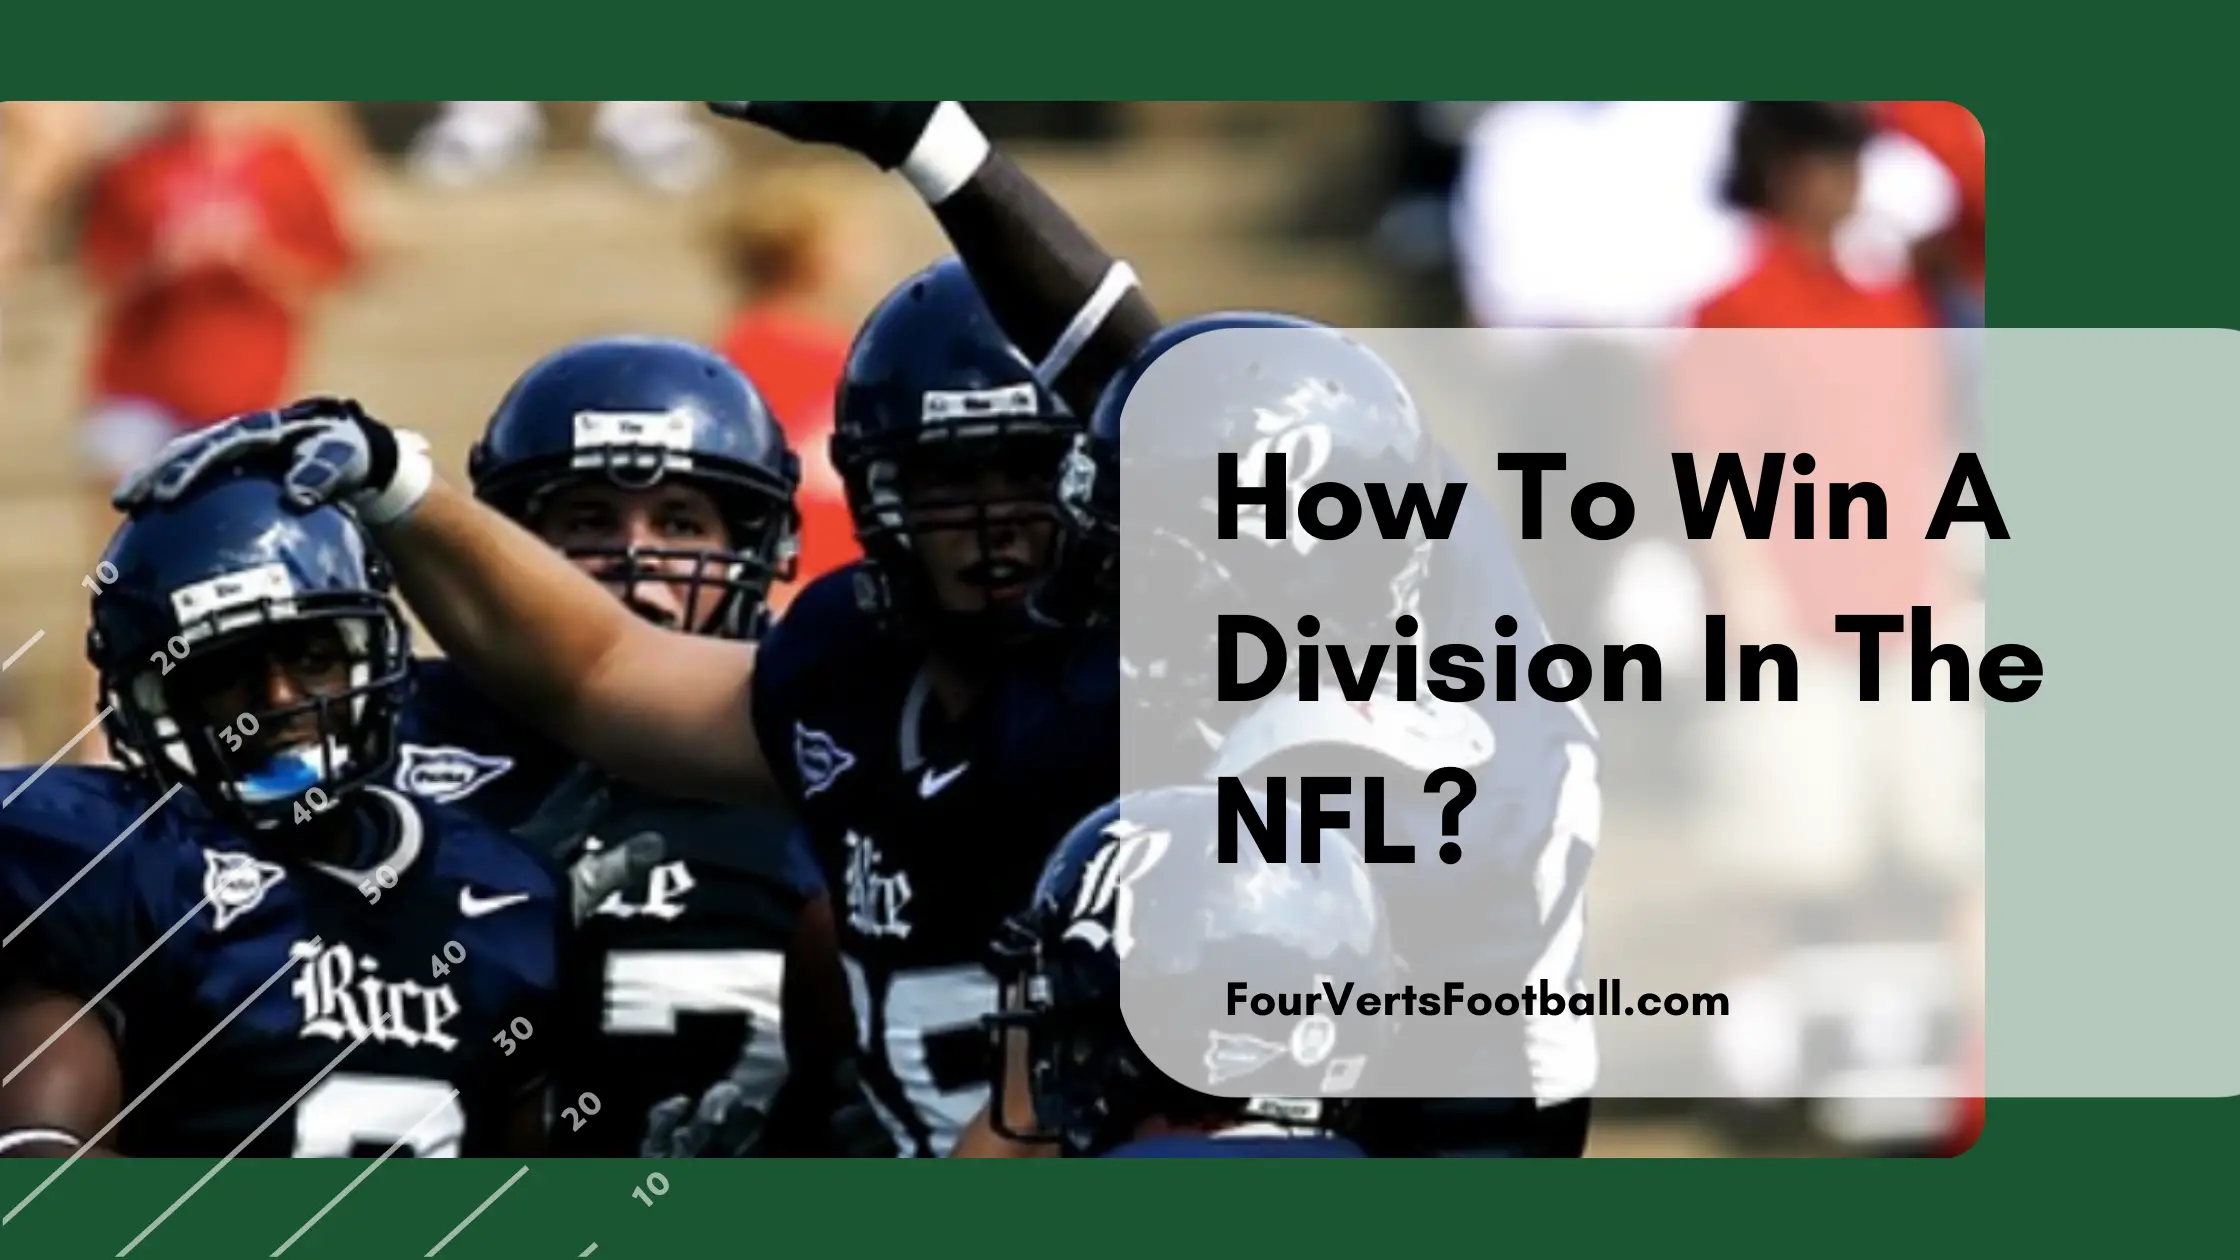 How To Win A Division In The NFL